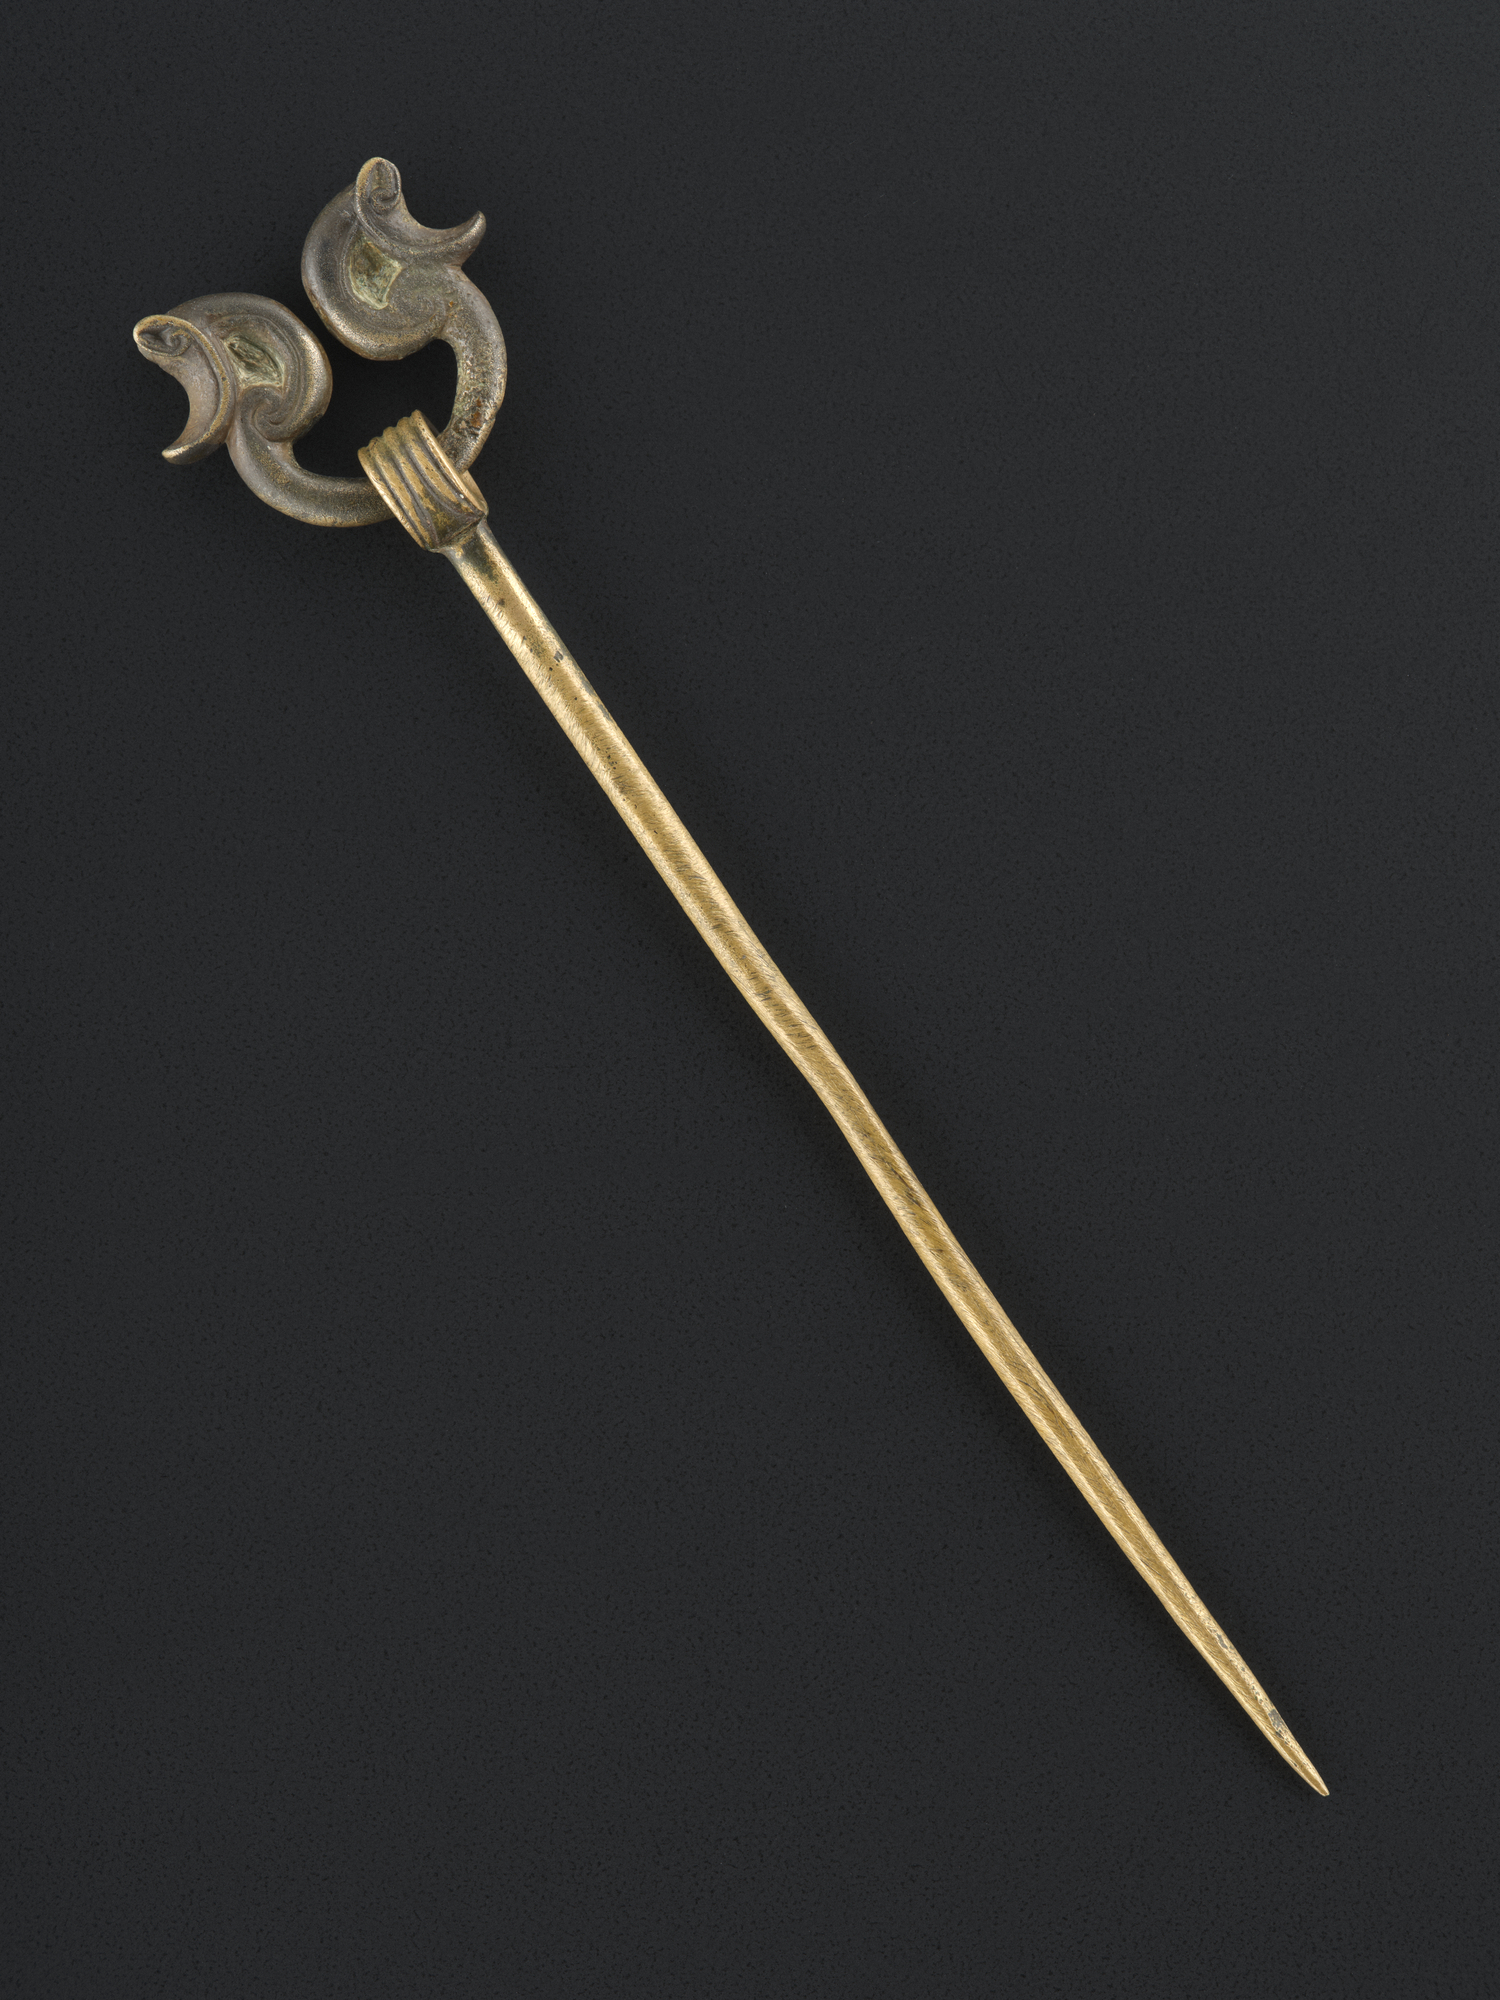 Image of Penannular brooch of bronze, locality unknown © National Museums Scotland